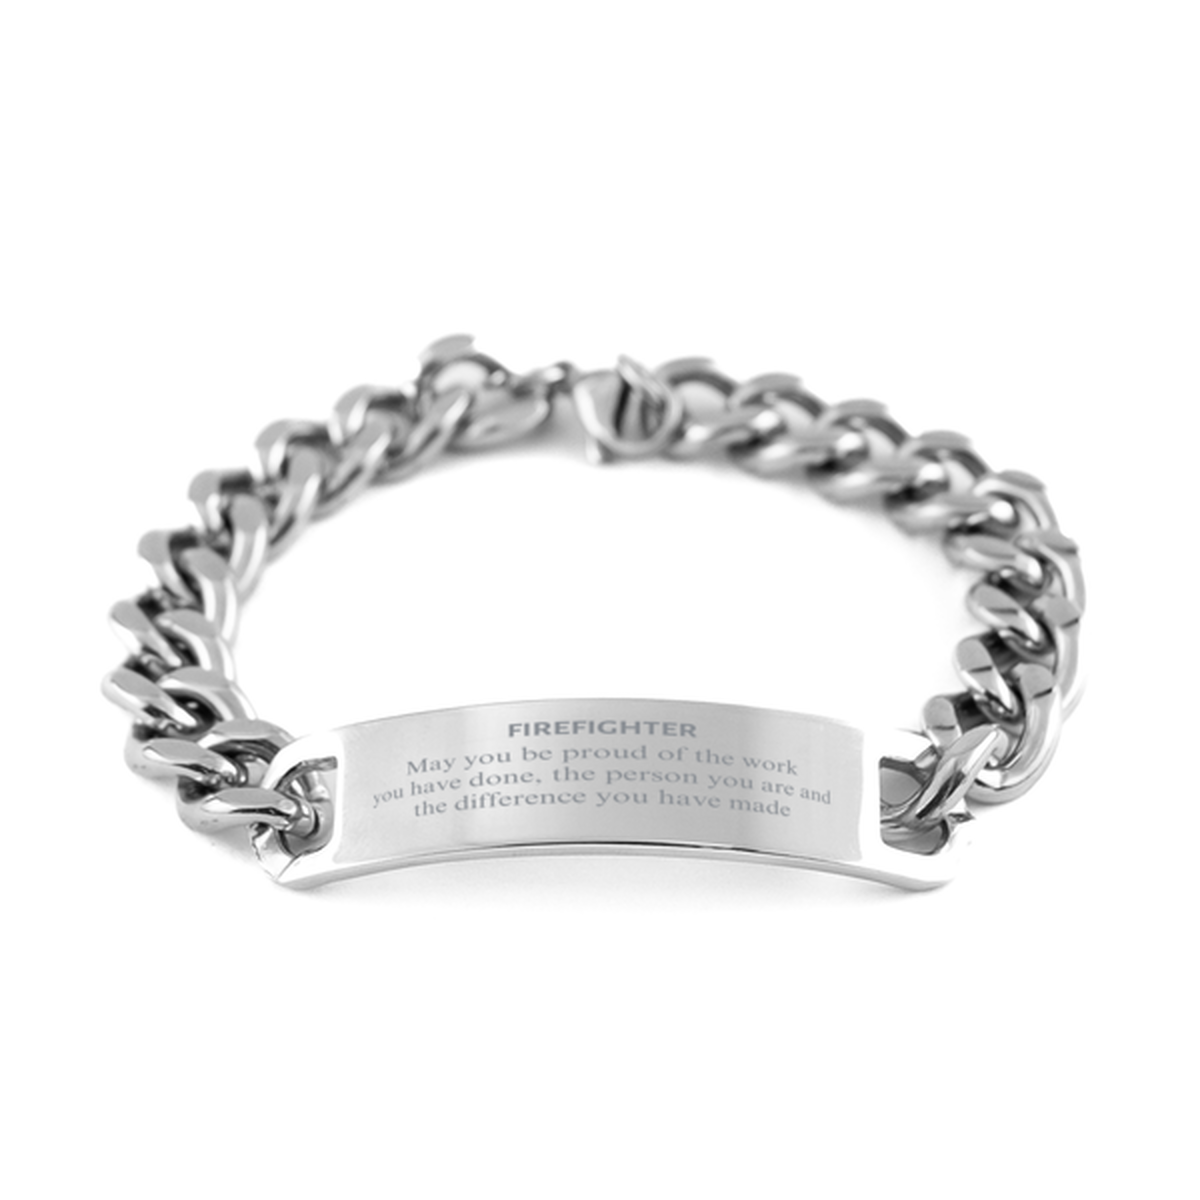 Firefighter May you be proud of the work you have done, Retirement Firefighter Cuban Chain Stainless Steel Bracelet for Colleague Appreciation Gifts Amazing for Firefighter